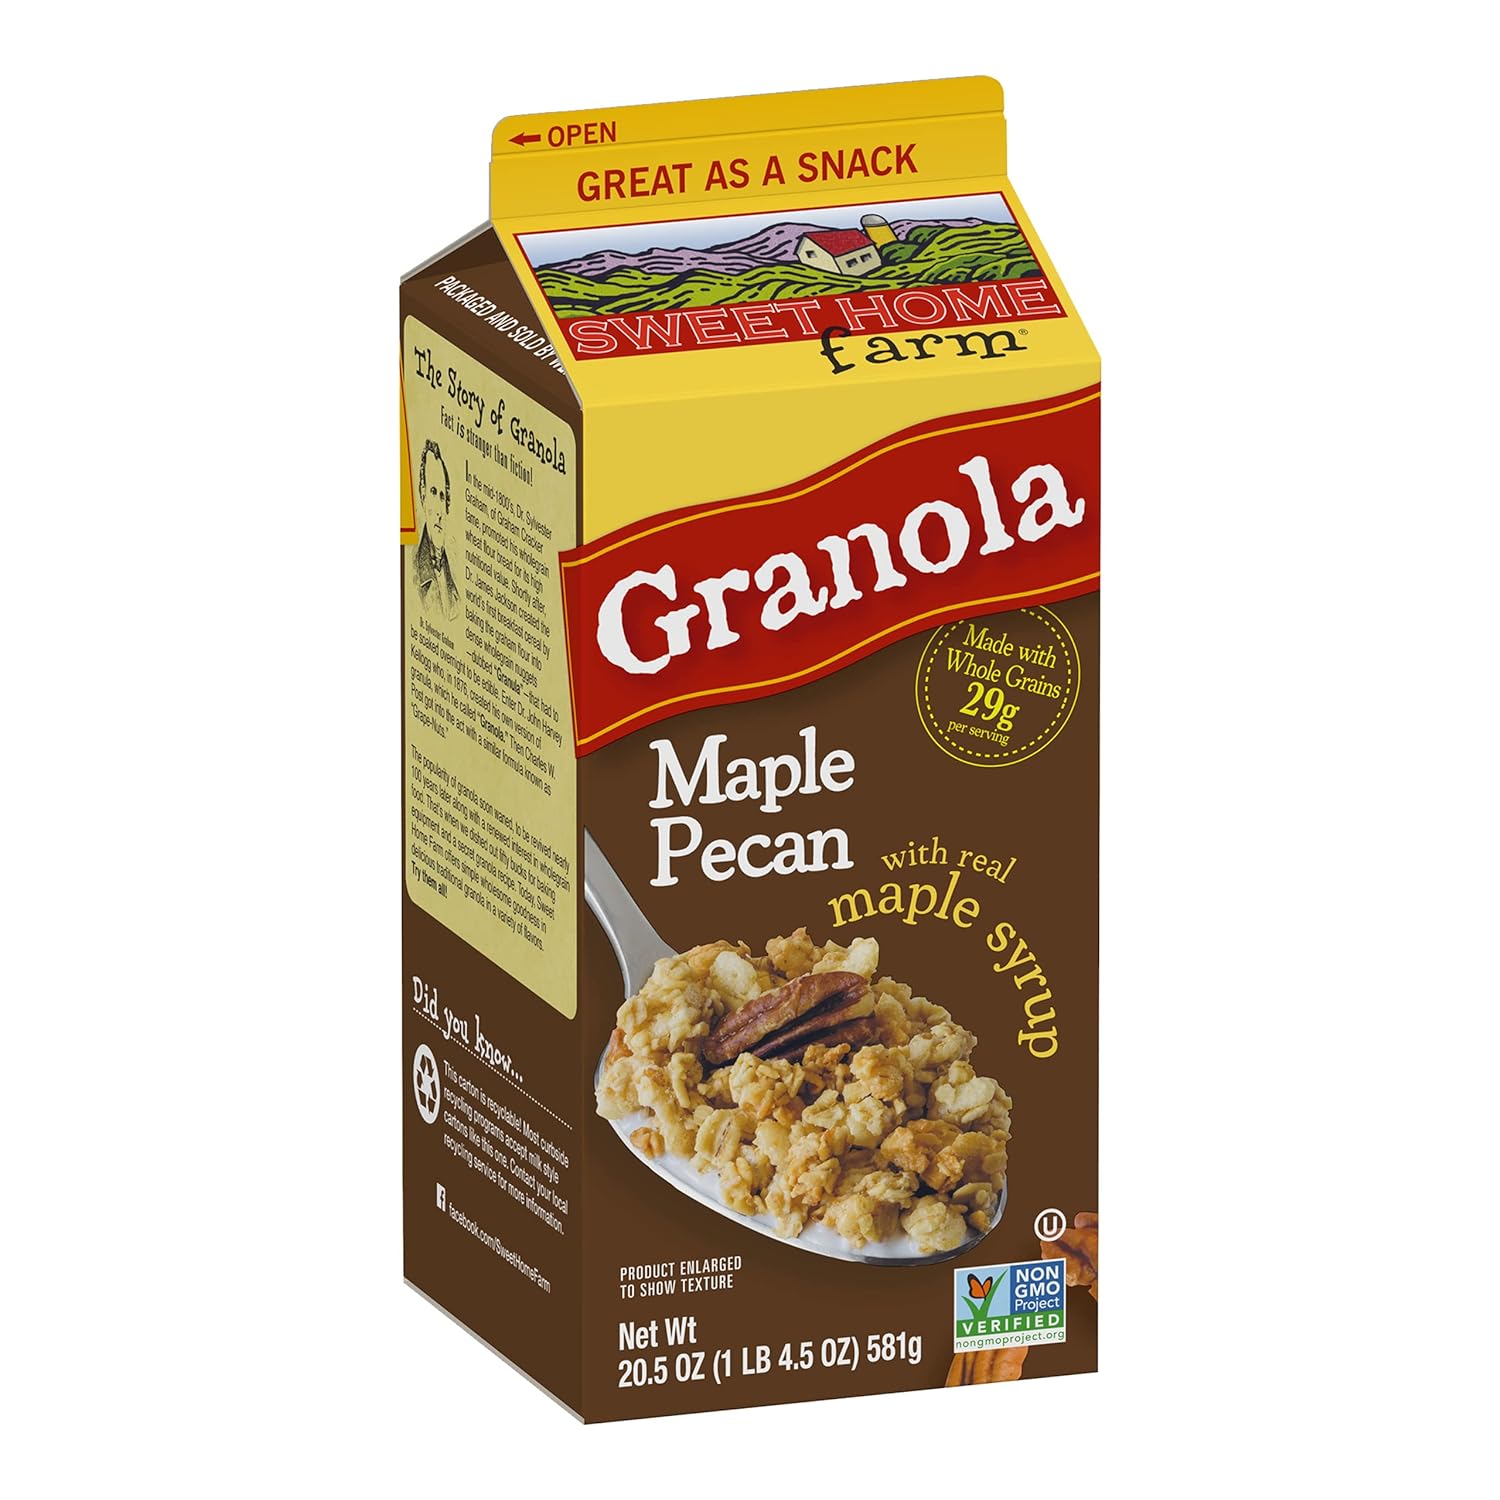 Sweet Home Farm Maple Pecan Granola, Made with Whole Grain, Non-GMO Project Verified, Kosher, Vegan, 20.5 Oz Recyclable Carton (Pack of 8)